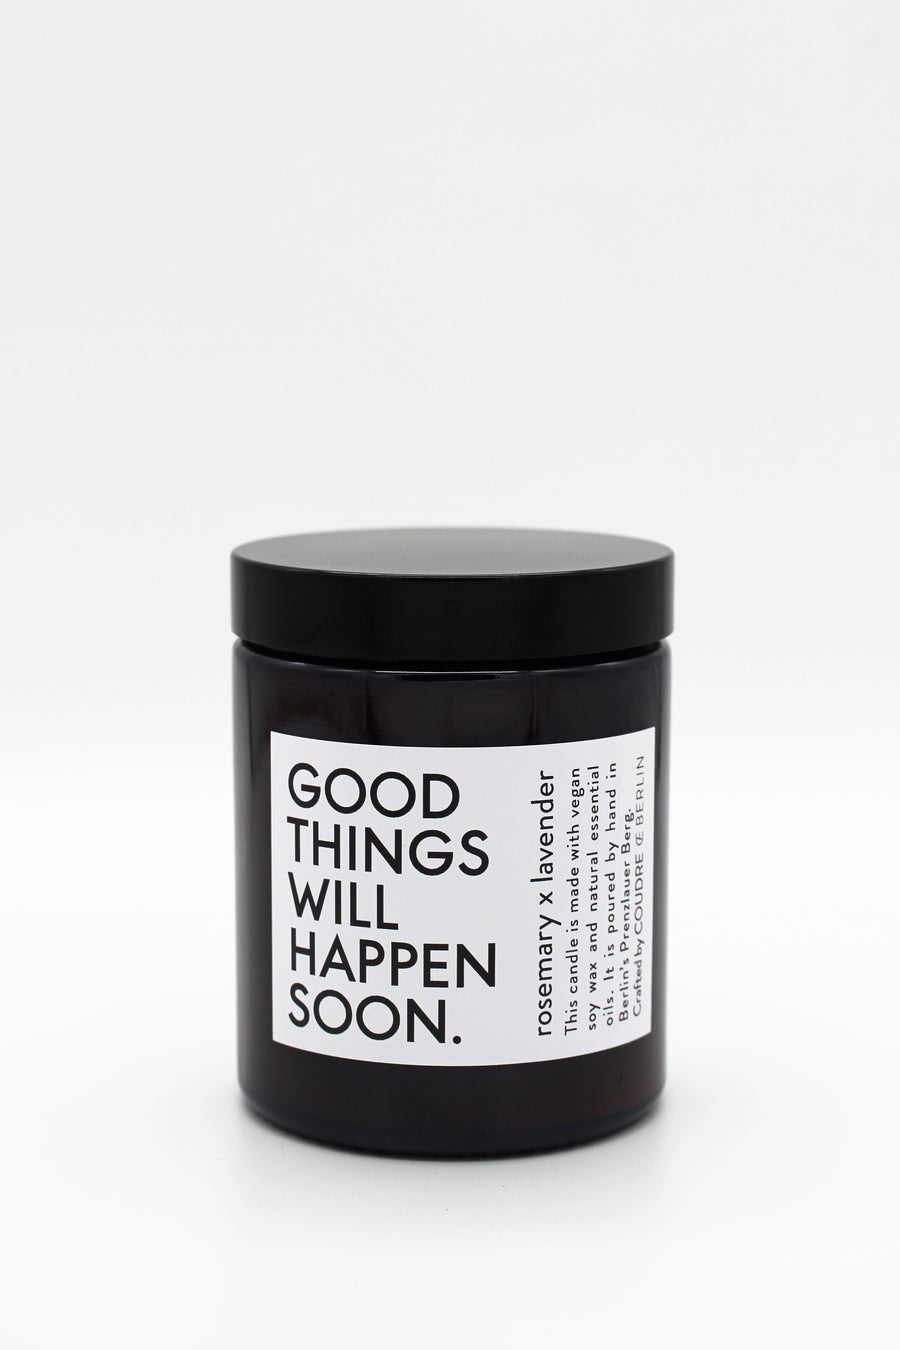 Good Things Will Happen Soon x Coudre Berlin Candle